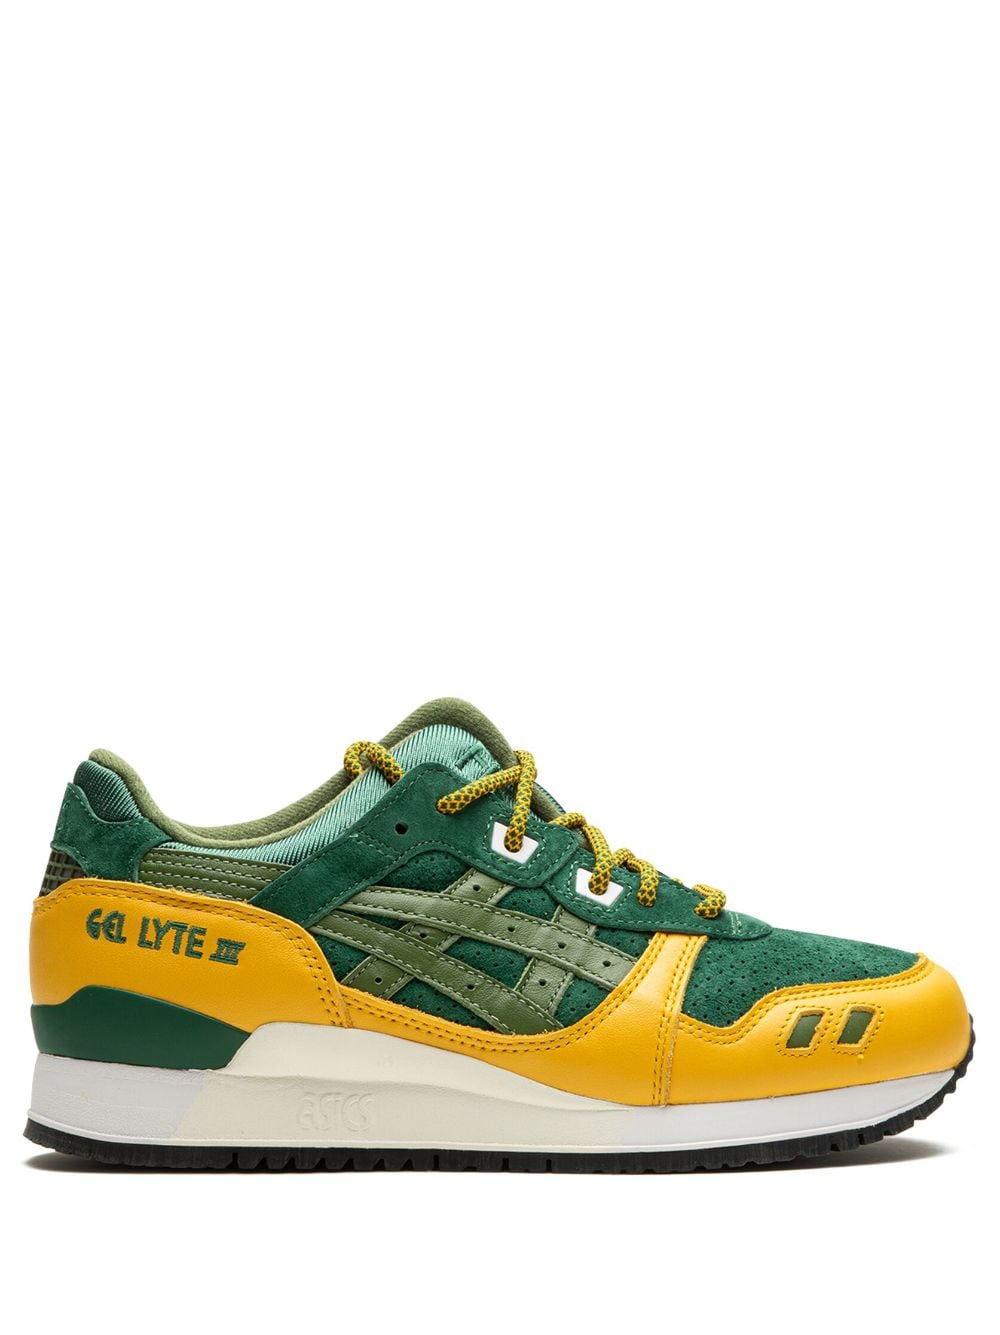 Asics Gel Lyte Iii 07 Remastered "rogue" Trainers In Green